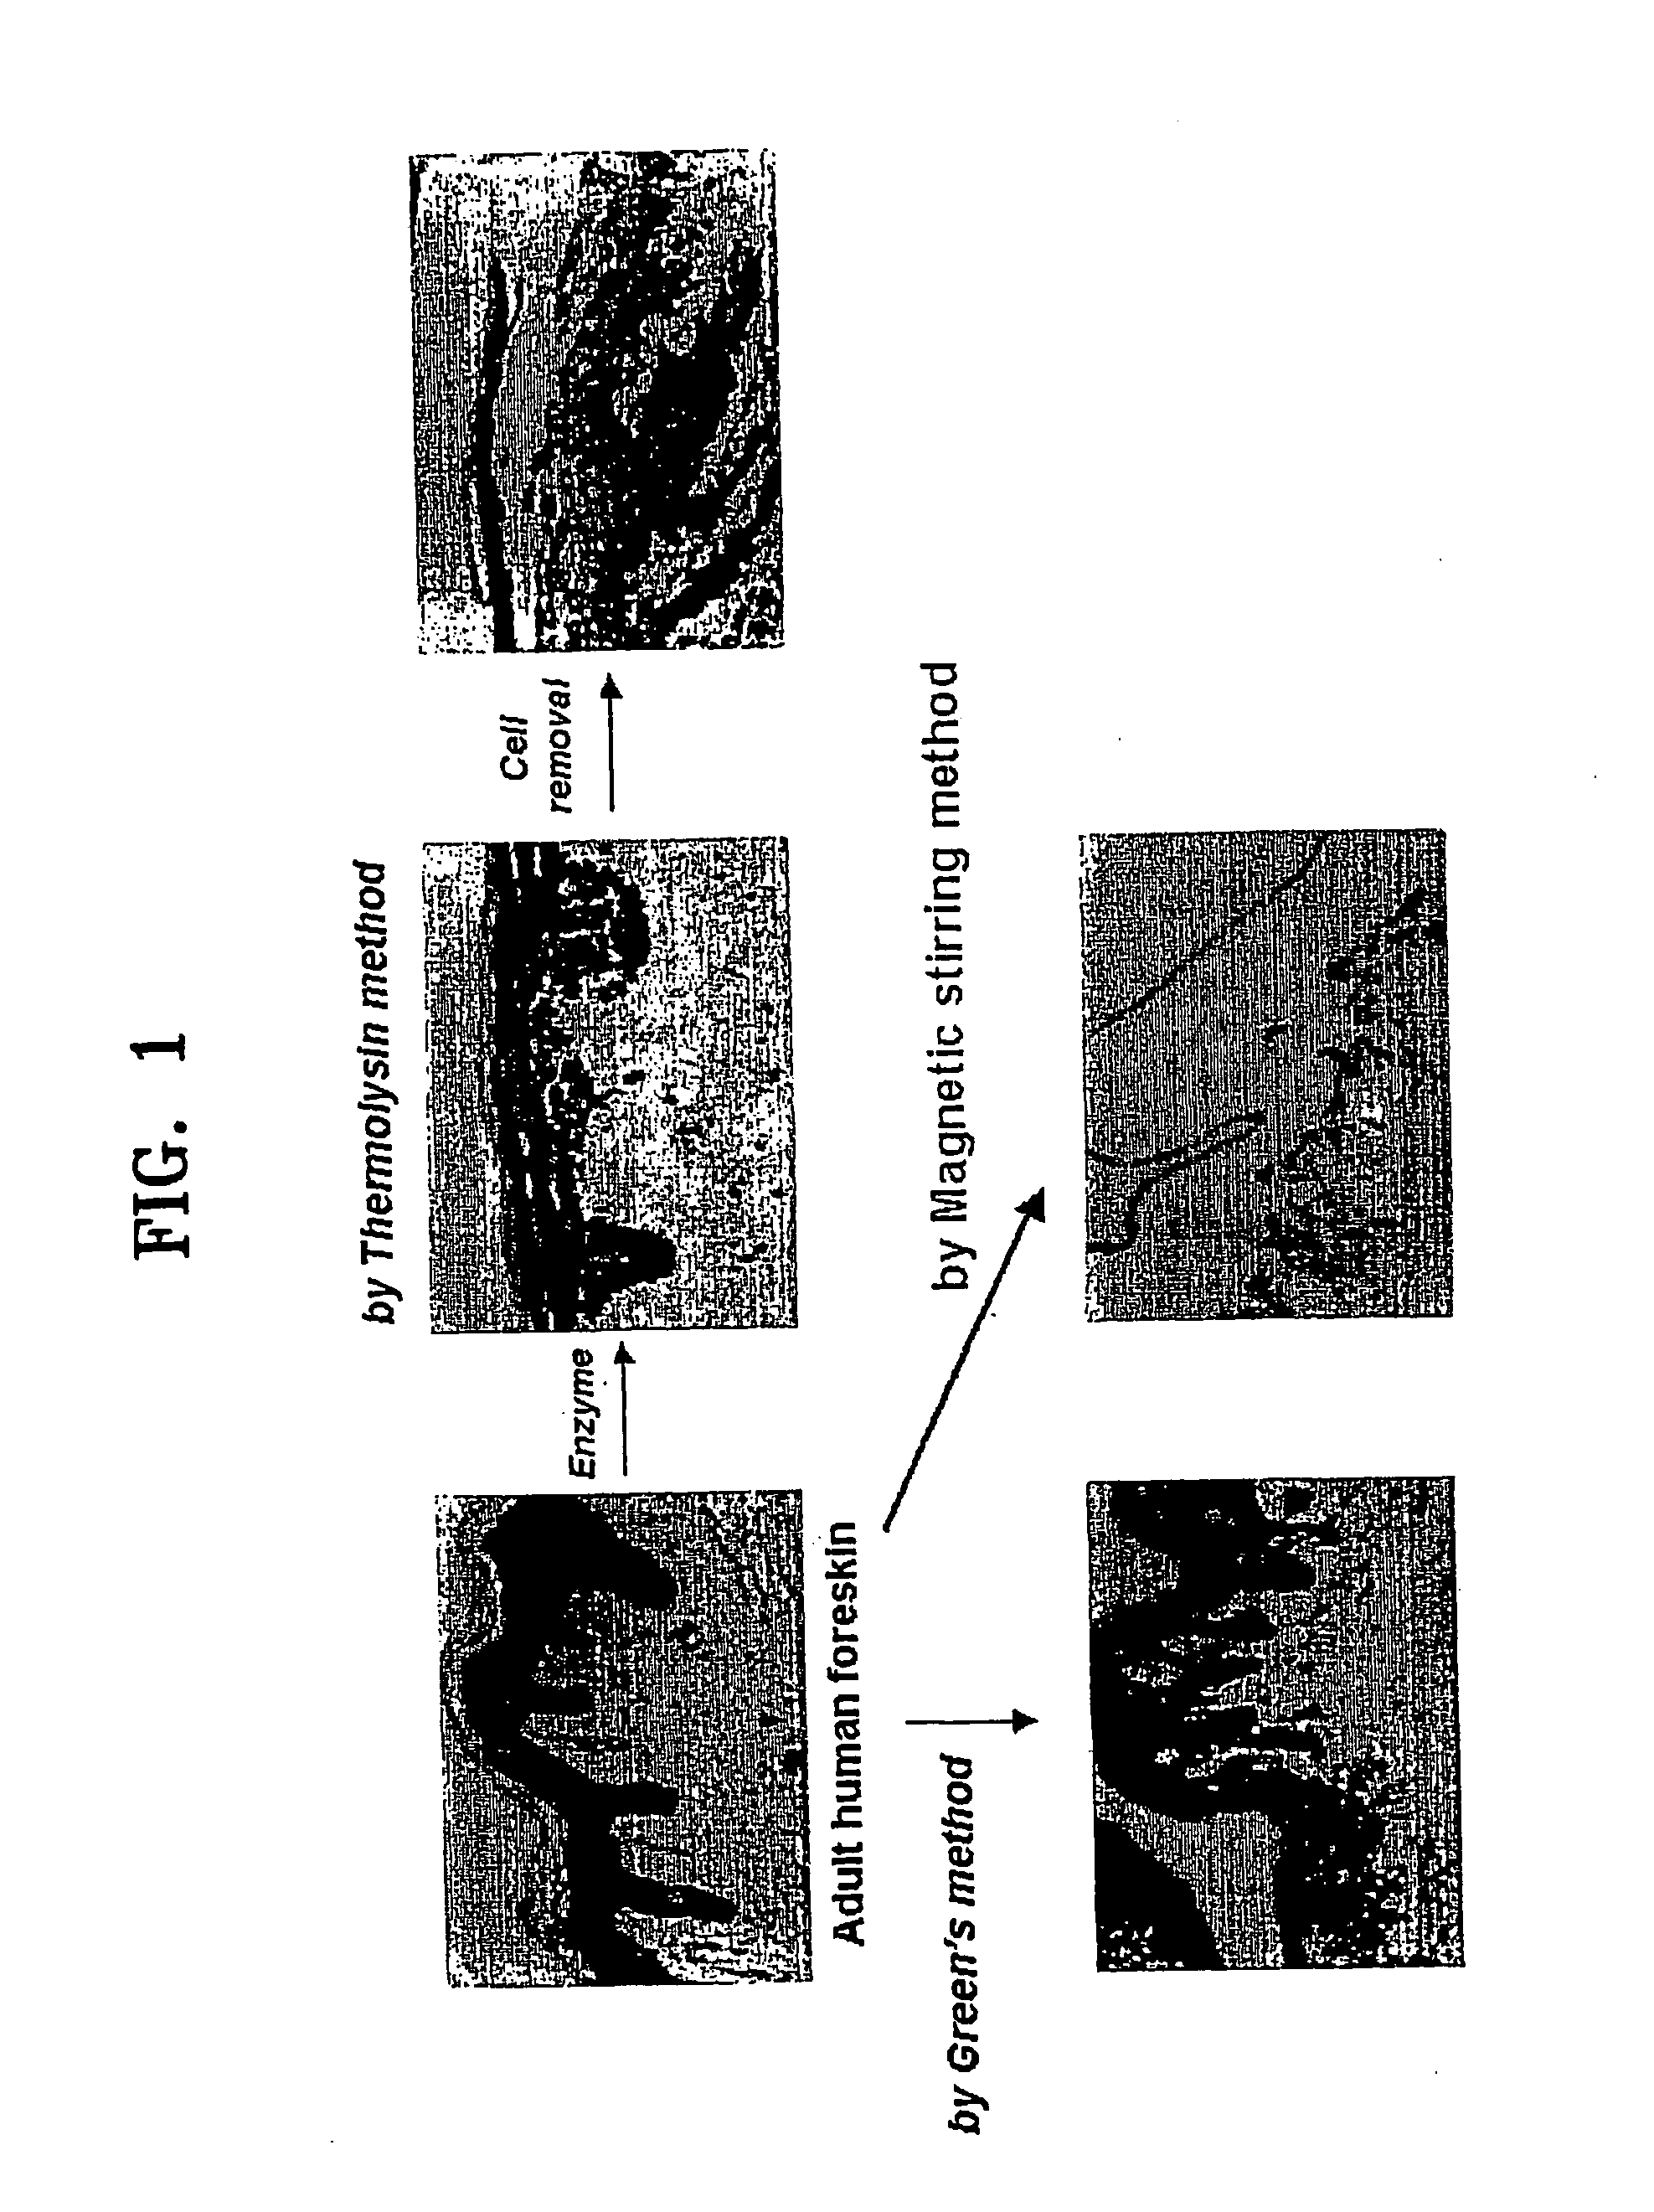 Method of isolating epithelial cells, method of preconditioning cells, and methods of preparing bioartificial skin and dermis with the epithelial cells or the preconditioned cells